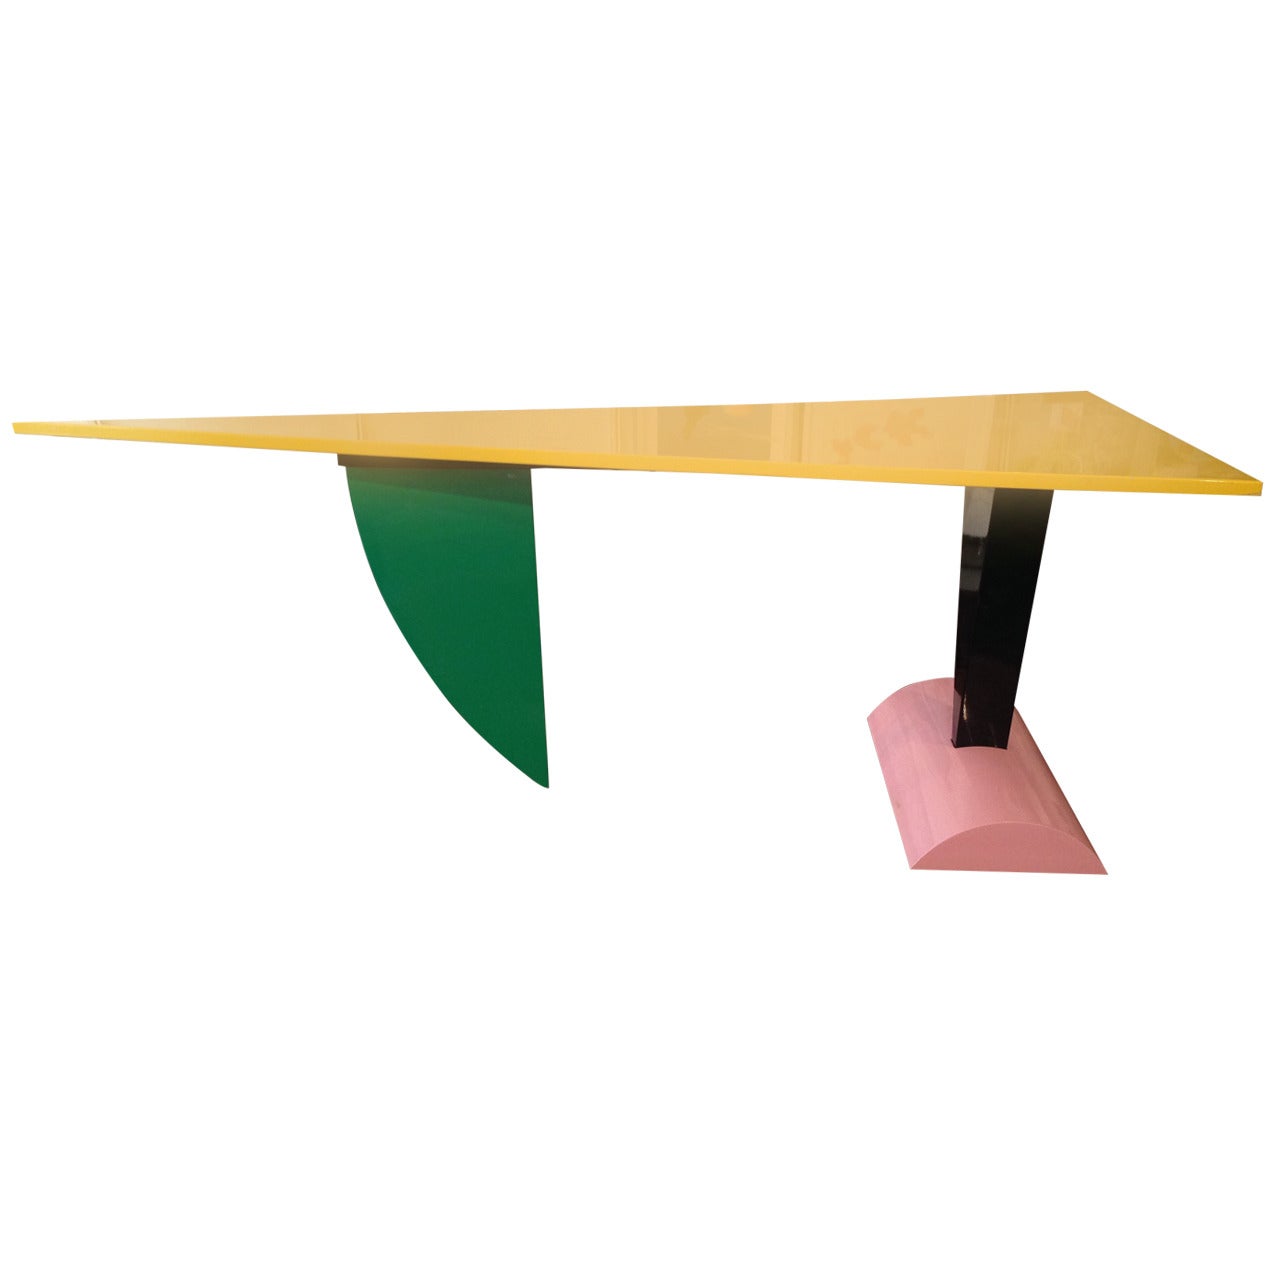 Peter Shire Brazil Table for Memphis Milano, 1981